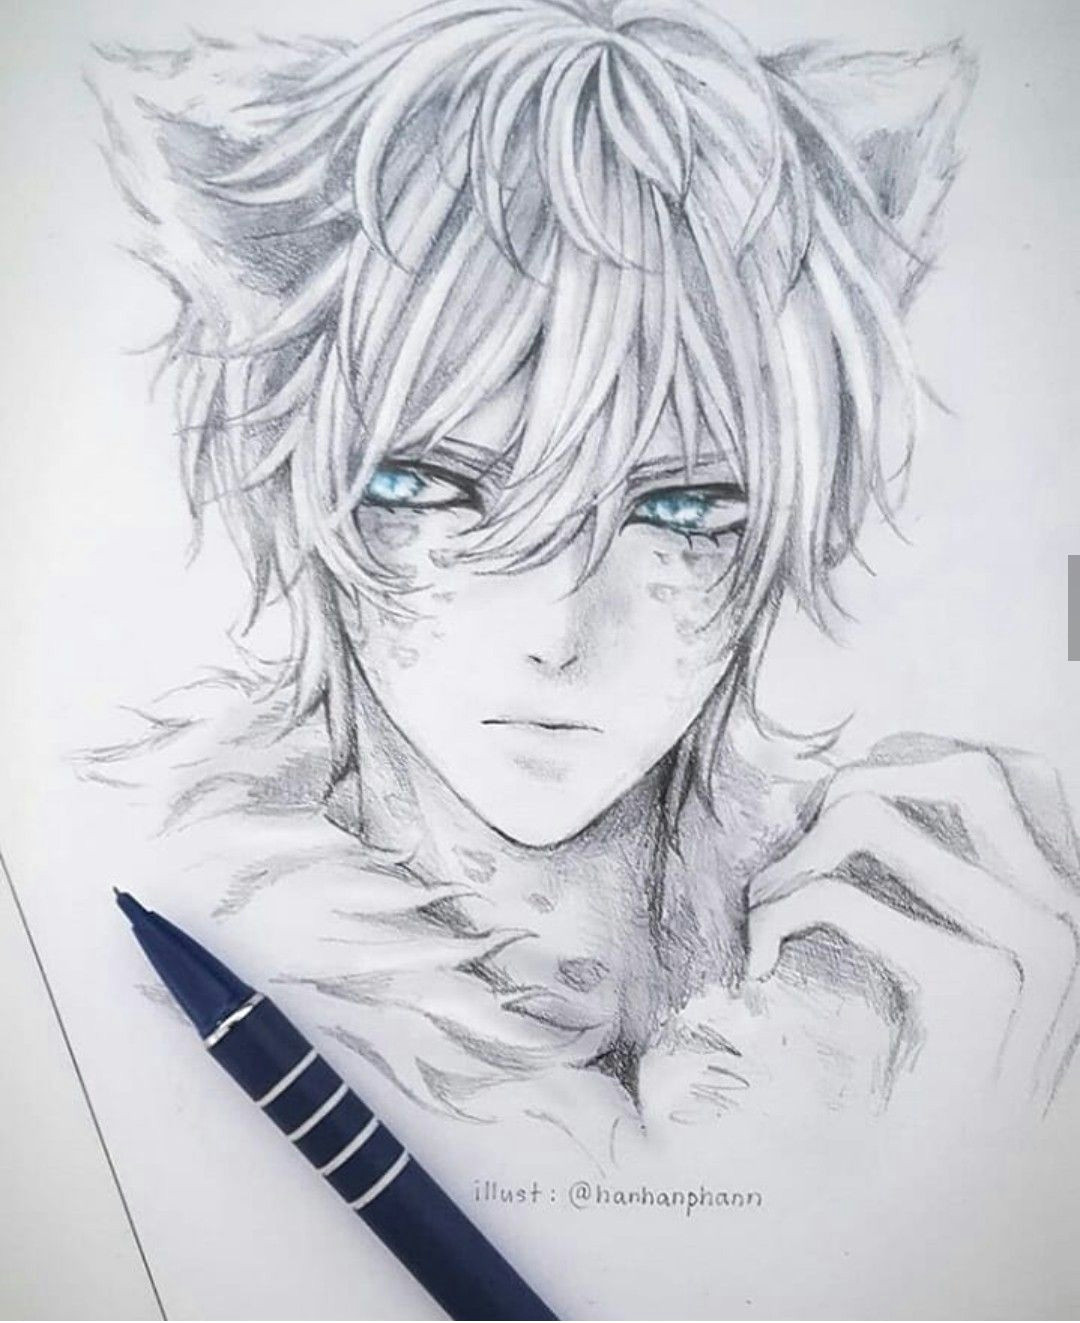 Anime Boy Drawings In Pencil Pin by Magg On Drawings In 2020 Anime Anime Art Fantasy